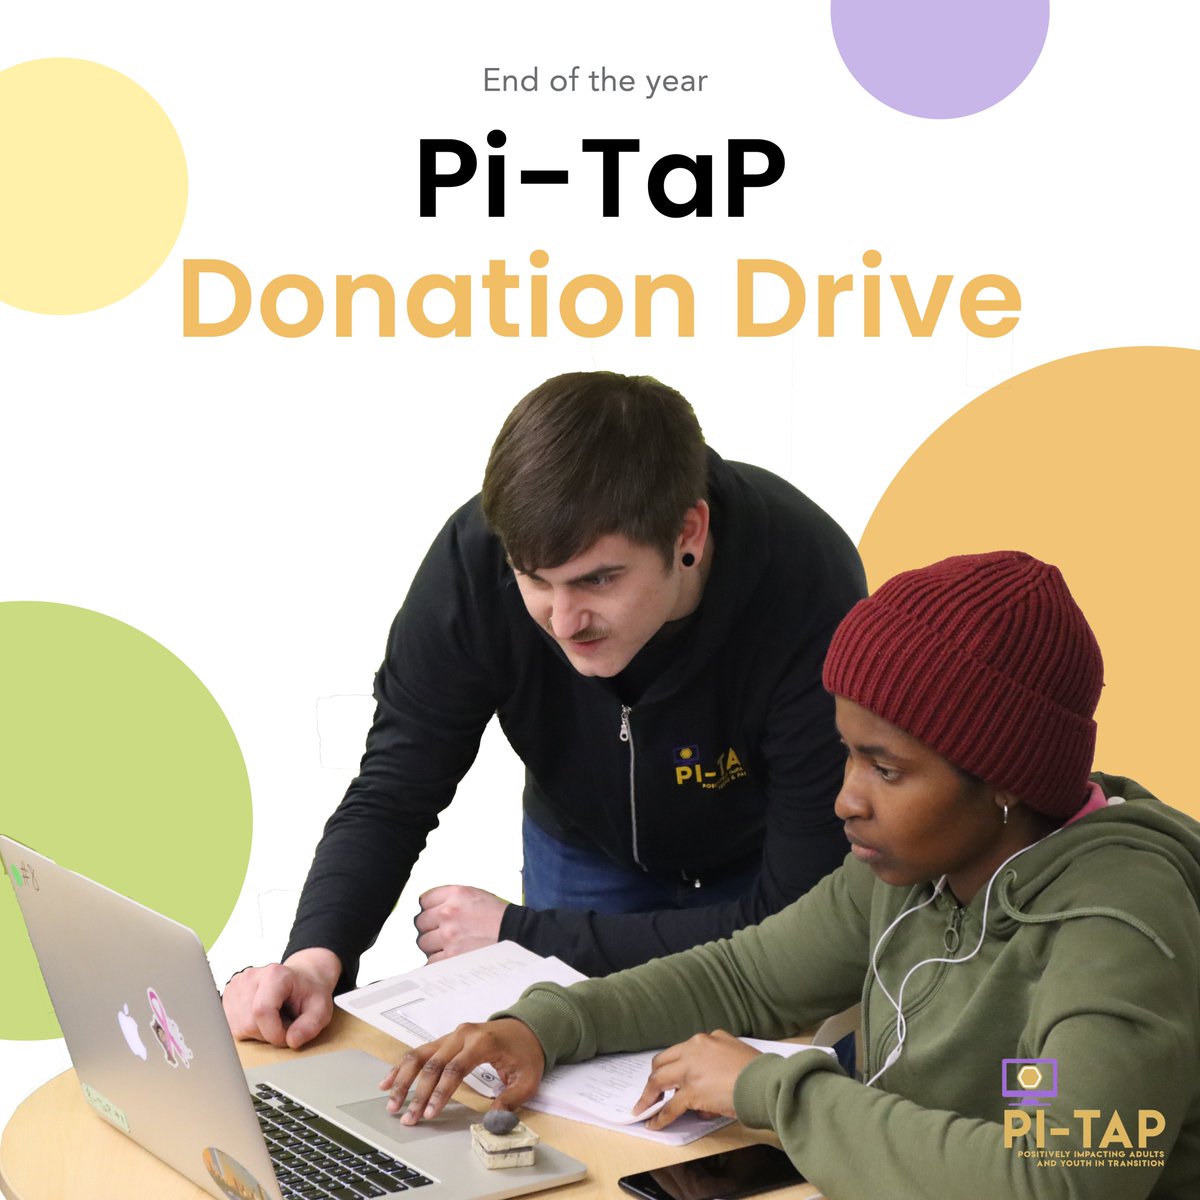 Donate to our end of the year fundraiser! Help launch Pi-TaP into the new year!

Donate today at: pi-tap.org/donate
.
.
#nonprofit #donate #fundraiser #supportDEI #DEI